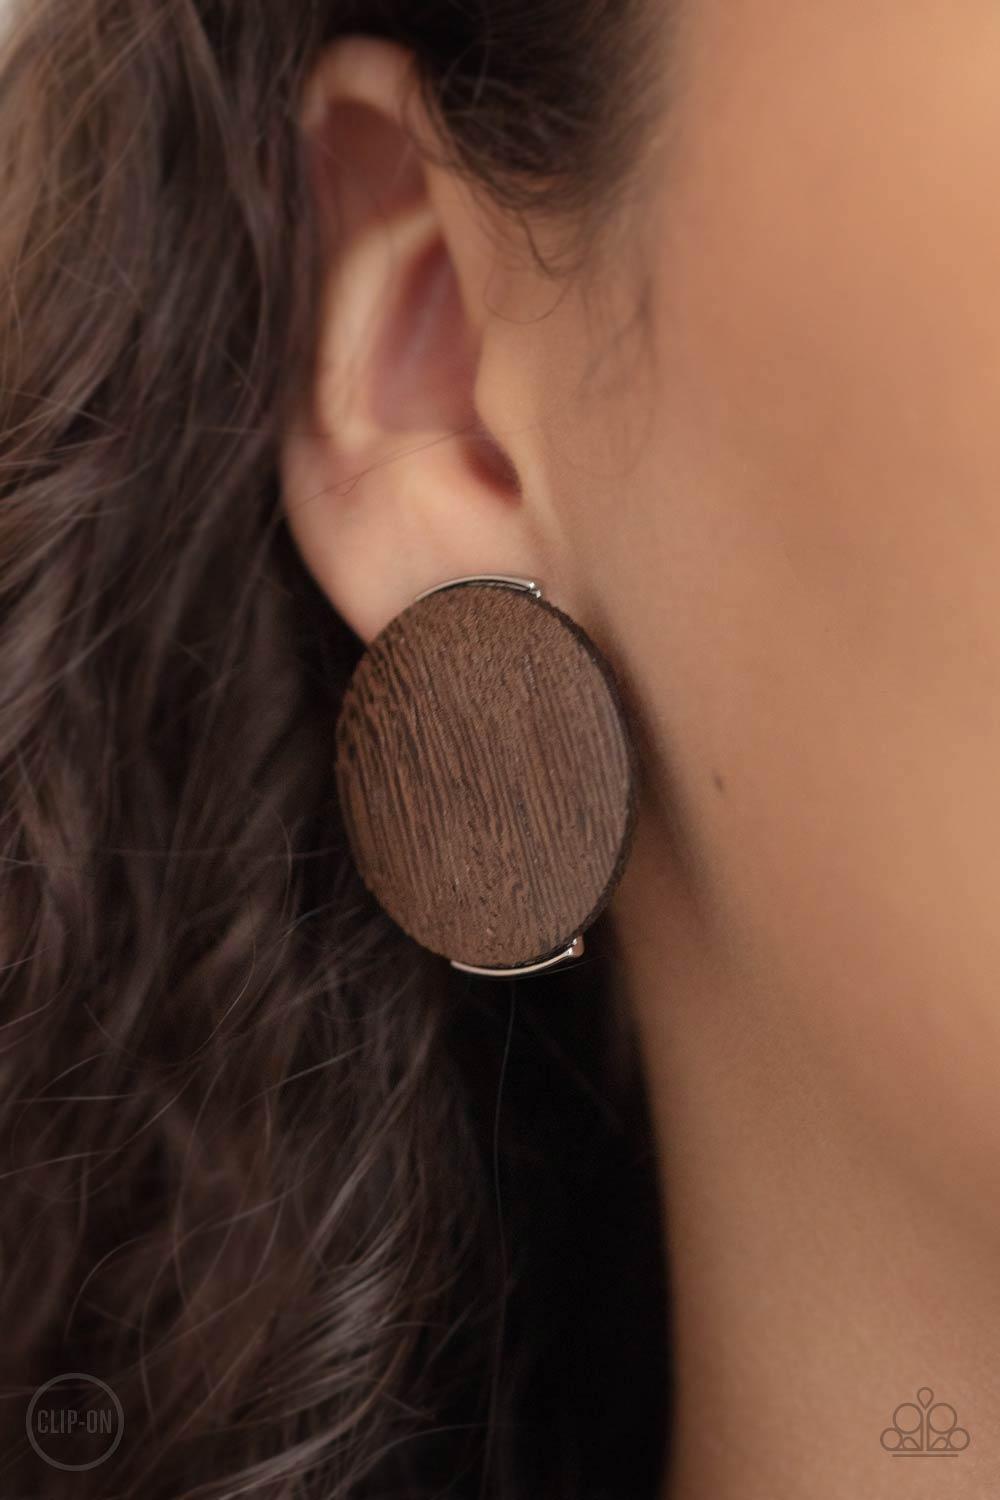 Paparazzi Accessories WOODWORK It ~Brown *Clip-On An oversized brown wooden disc is fitted in place between a silver frame, creating an earthy effect. Earring attaches to a standard clip-on fitting. Sold as one pair of clip-on earrings. Jewelry